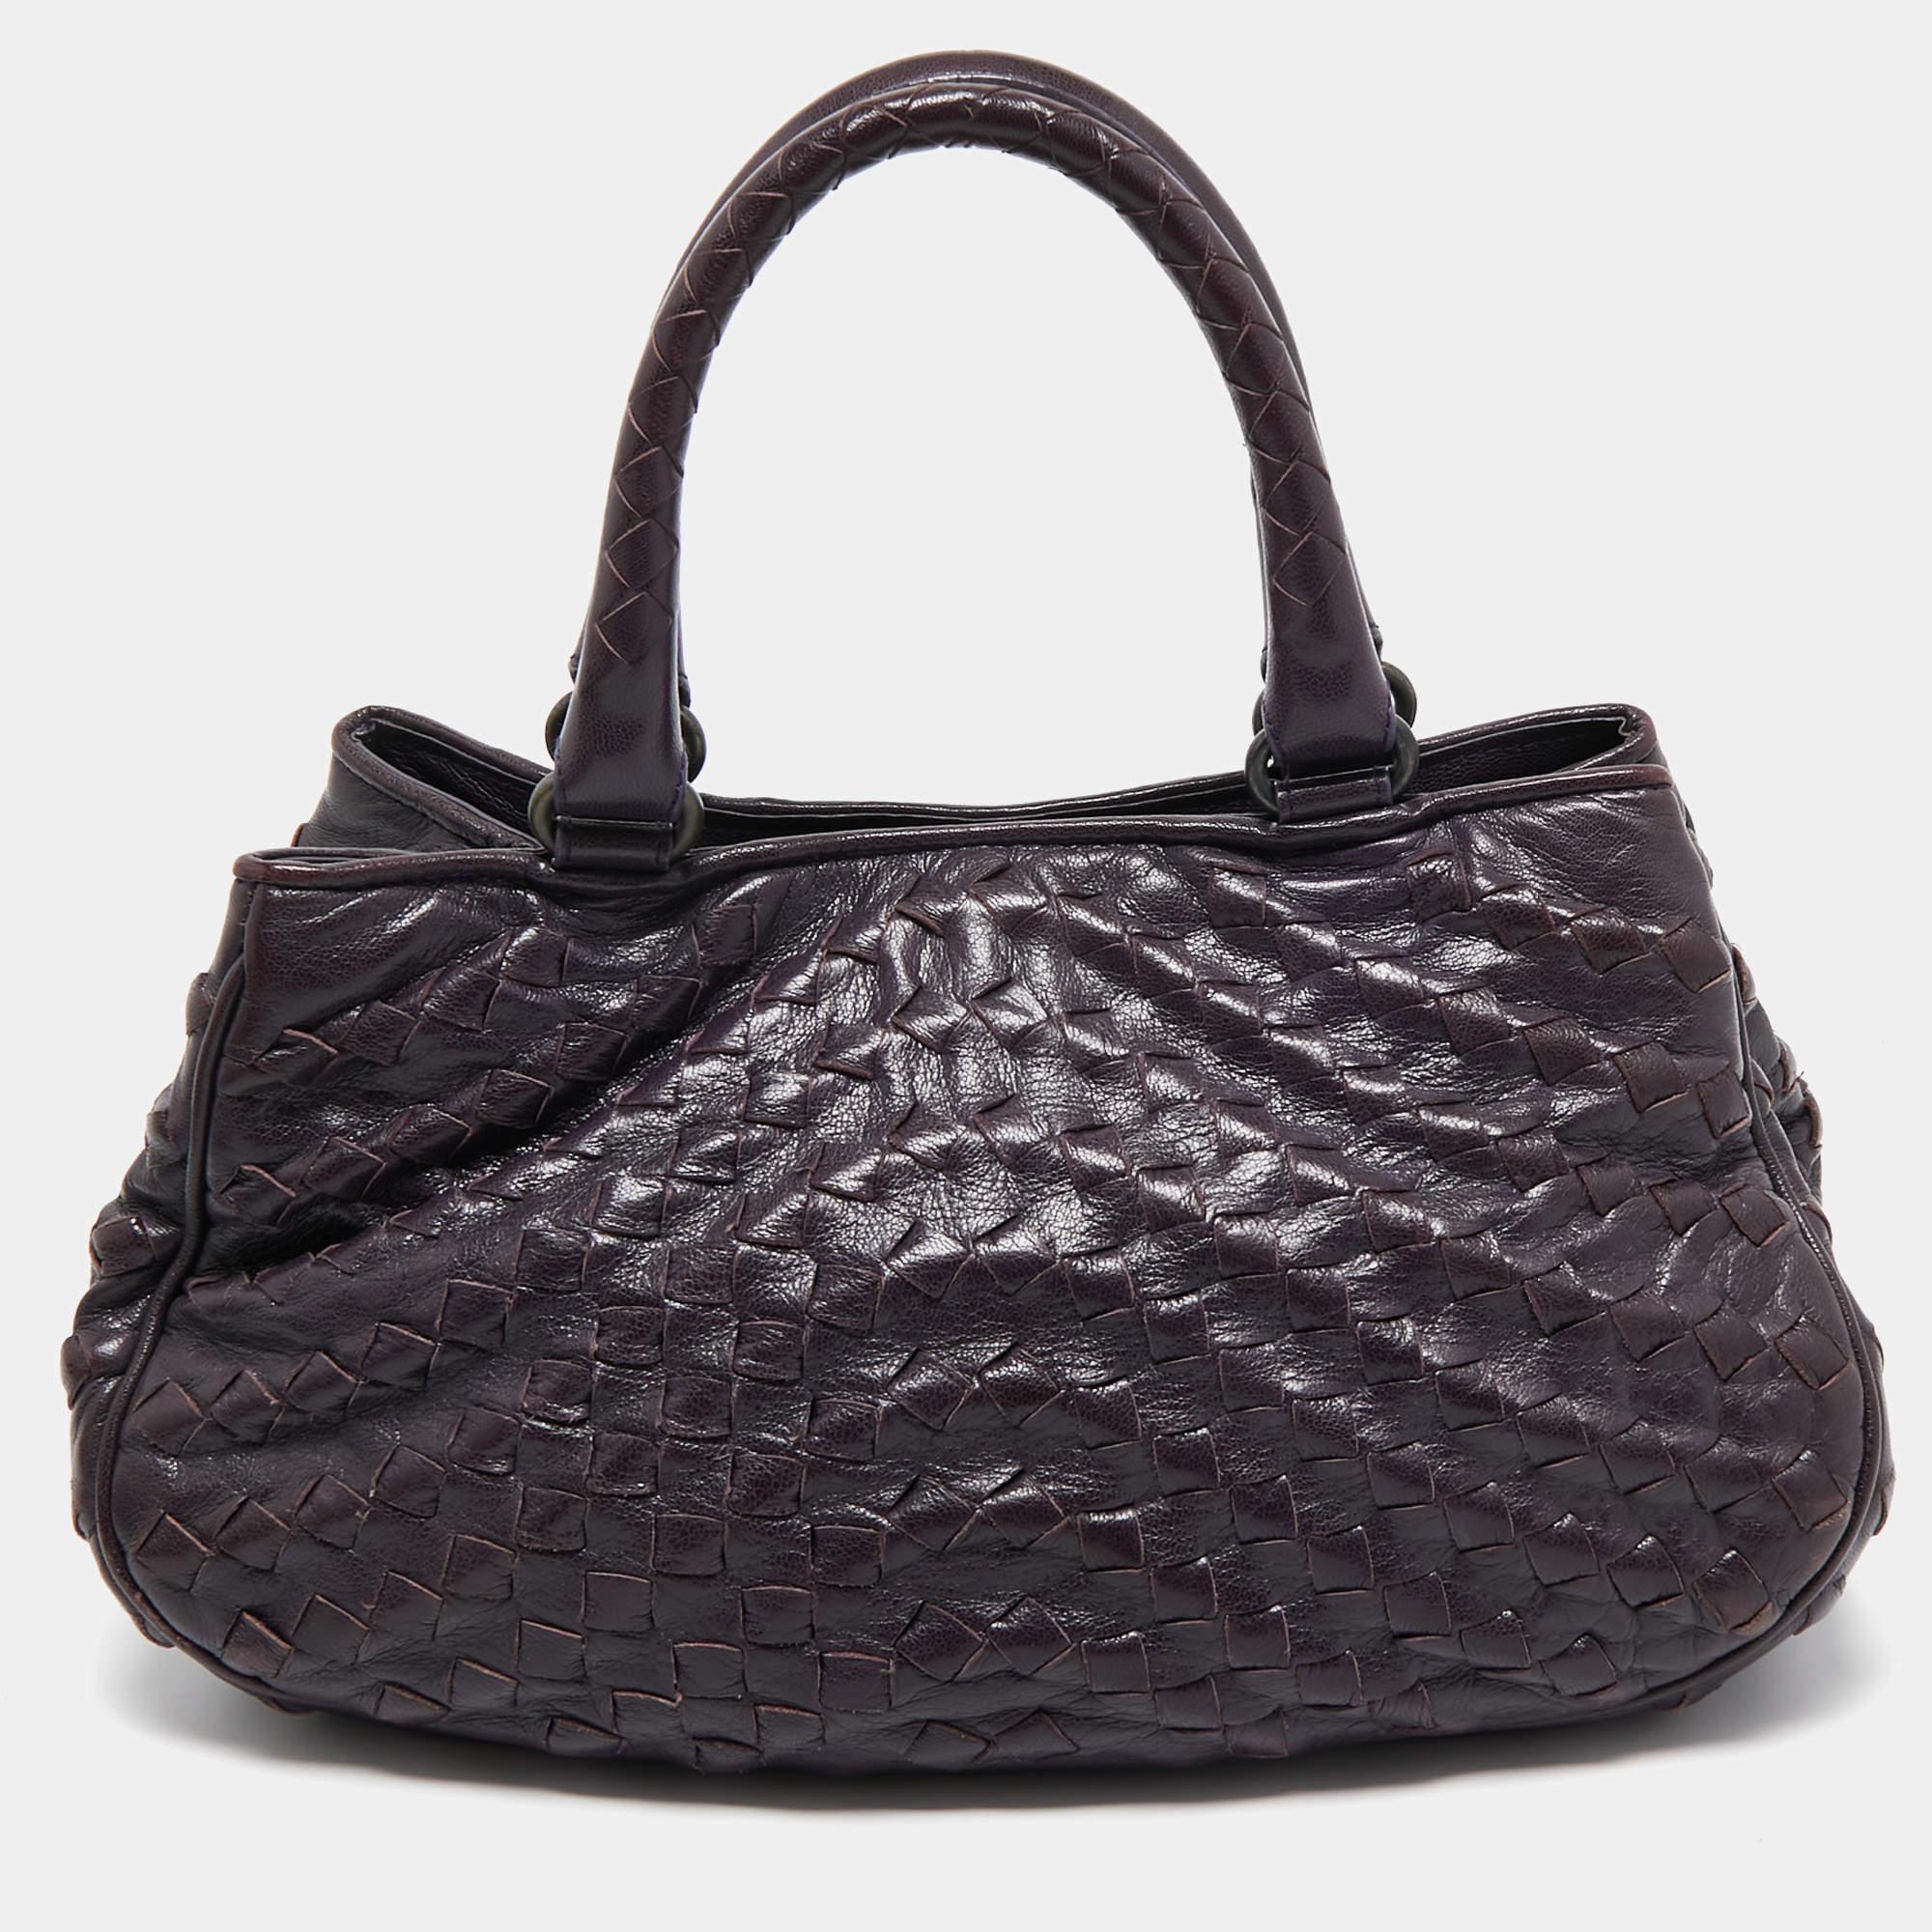 Timelessly elegant and stylish, Bottega Veneta's collections capture the effortless, nonchalant finesse of the modern woman. Crafted from leather in their signature Intrecciato weave, this chic tote features a purple hue and a spacious interior for